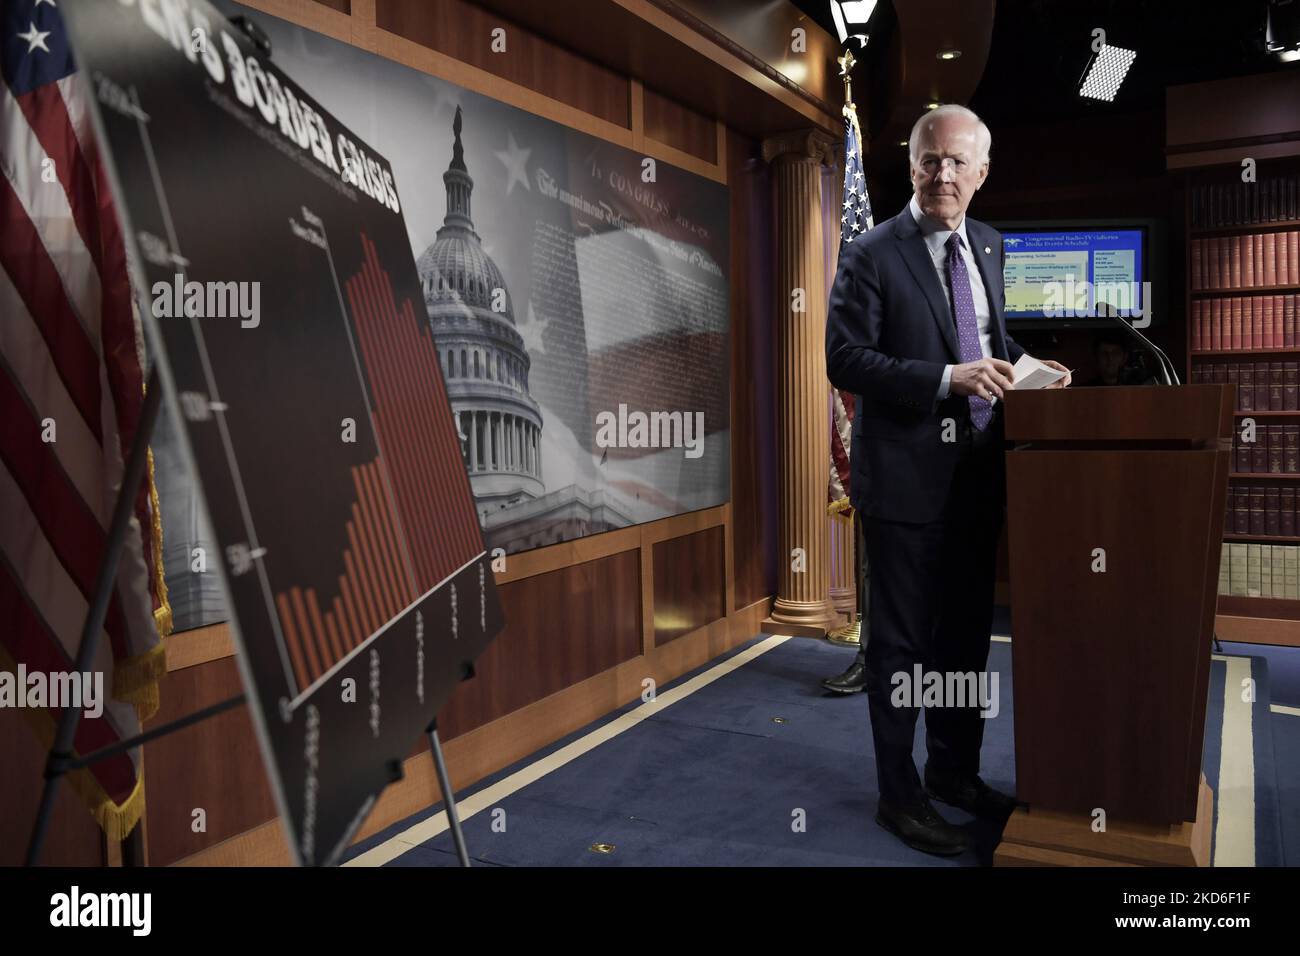 Senator John Cornyn(R-TX) alongside GOP members speaks about US-MX border during a press conference, today on March 30, 2022 at SVC/Capitol Hill in Washington DC, USA. (Photo by Lenin Nolly/NurPhoto) Stock Photo